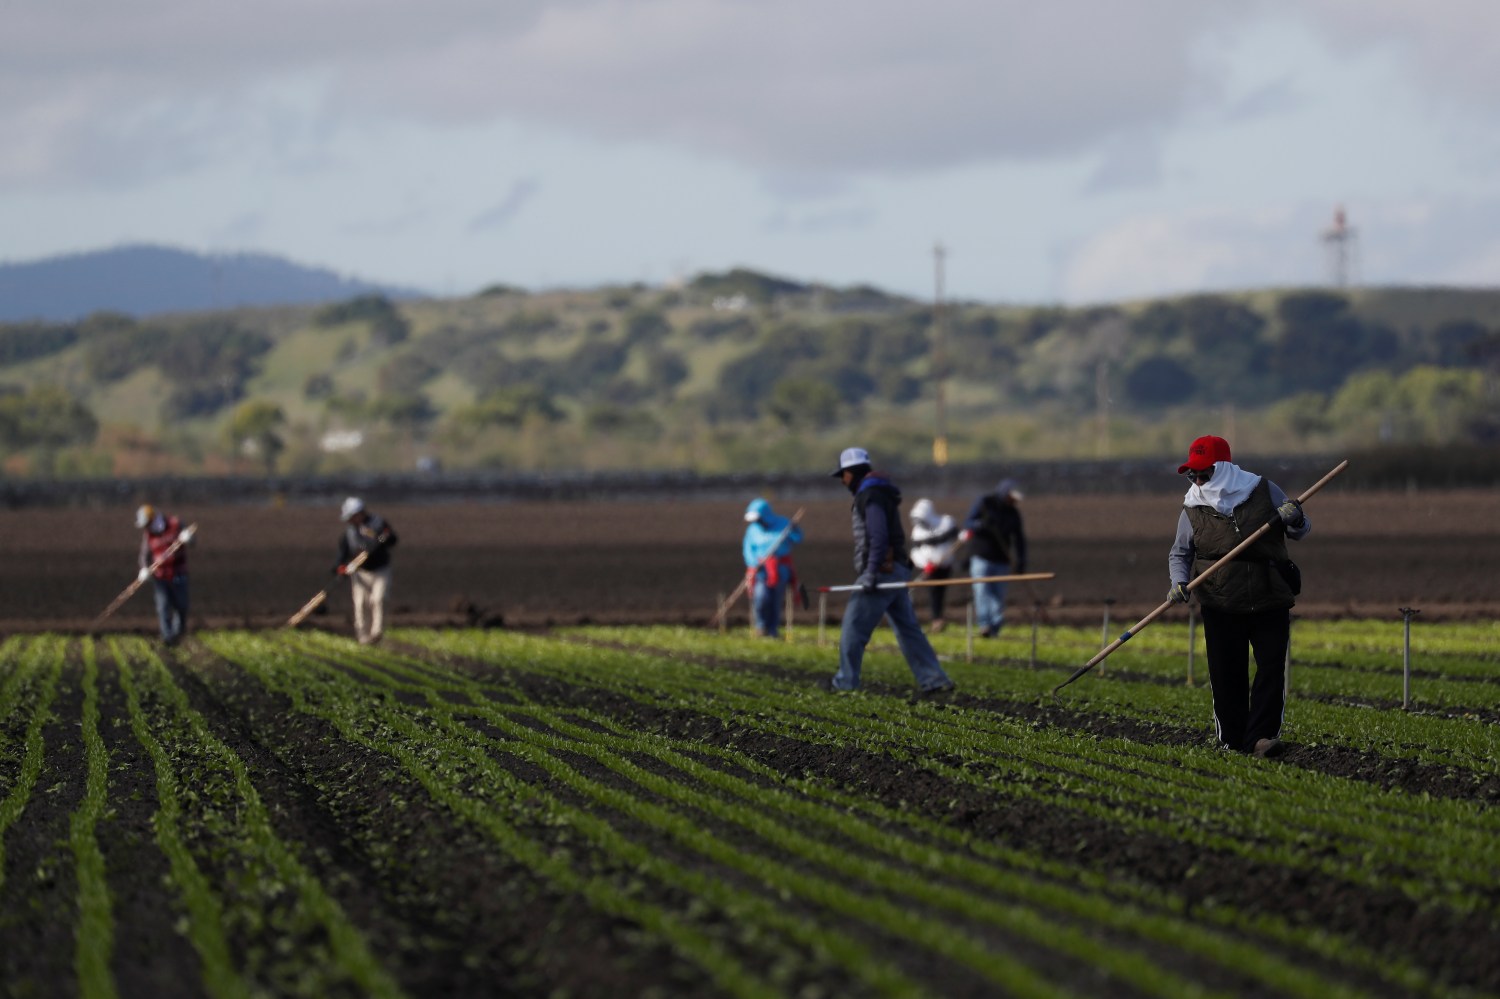 Migrant workers clean fields amid an outbreak of the coronavirus disease (COVID-19), in the Salinas Valley near Salinas, California, U.S., March 30, 2020. Picture taken March 30, 2020. REUTERS/Shannon Stapleton